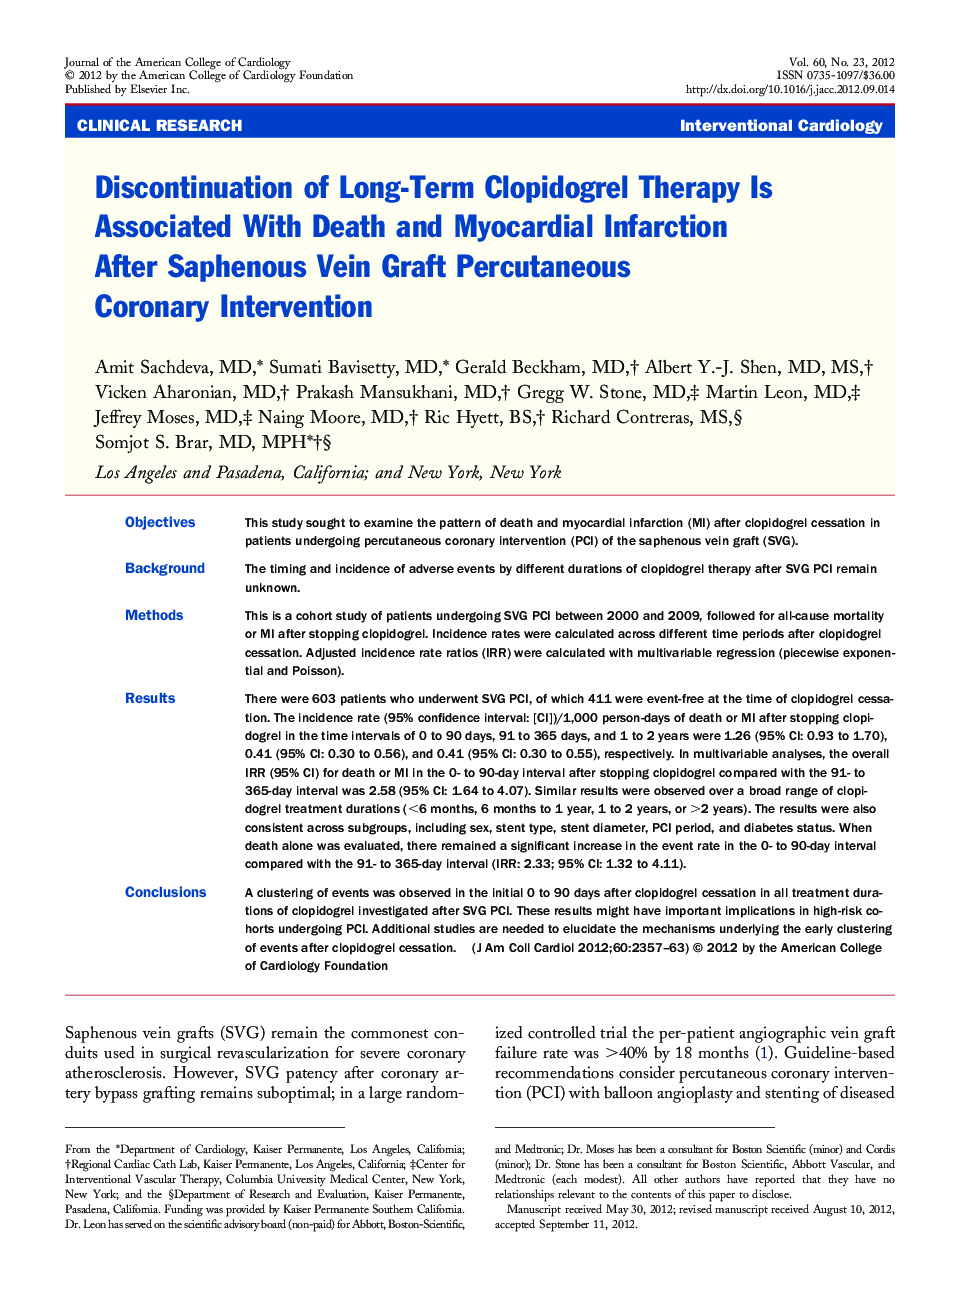 Discontinuation of Long-Term Clopidogrel Therapy Is Associated With Death and Myocardial Infarction After Saphenous Vein Graft Percutaneous Coronary Intervention